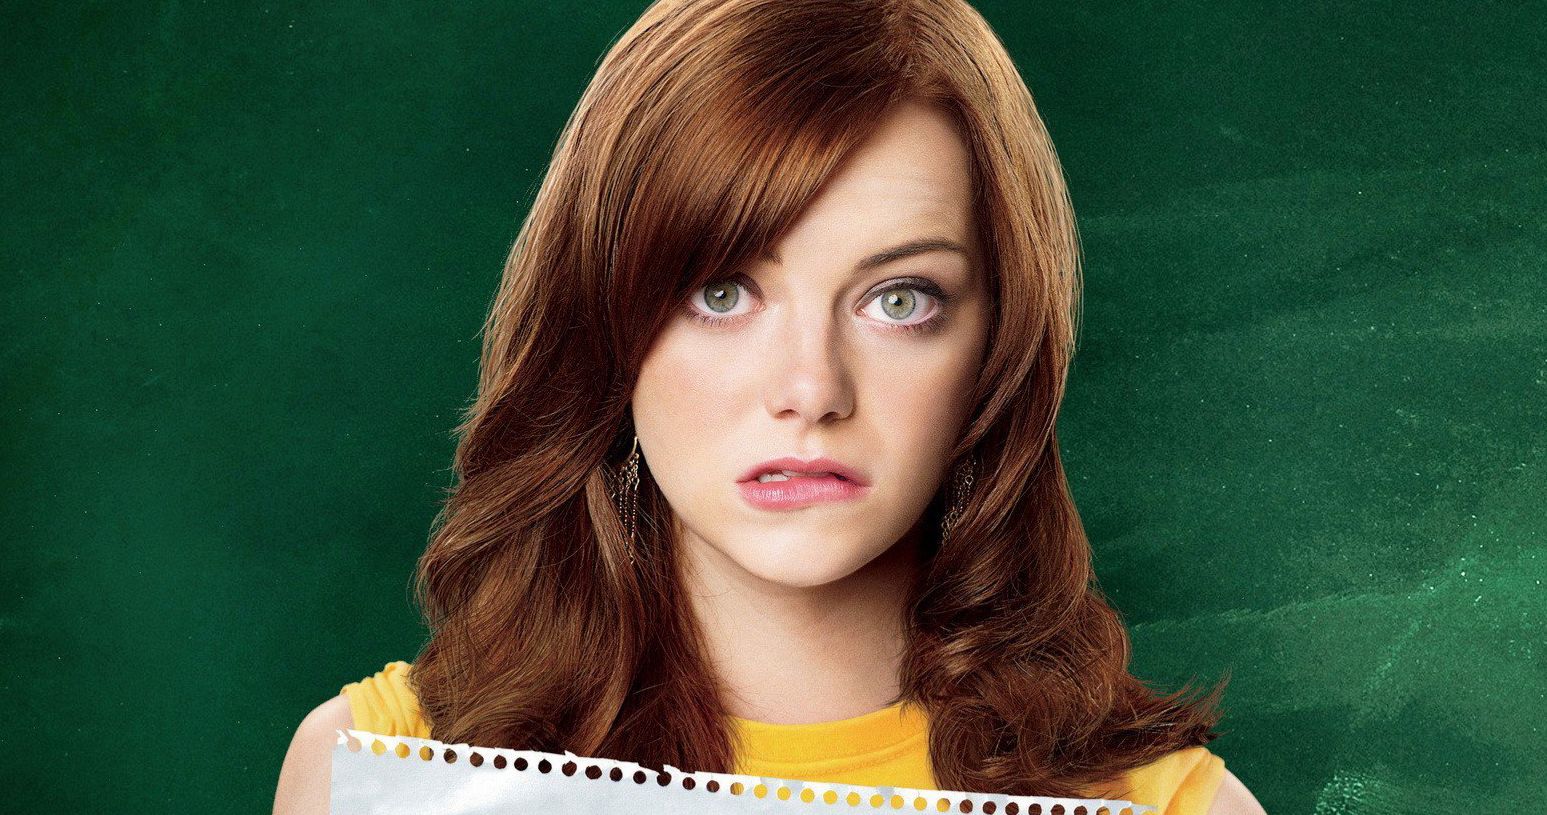 Easy A Might Get a Sequel, But Will Emma Stone Return?